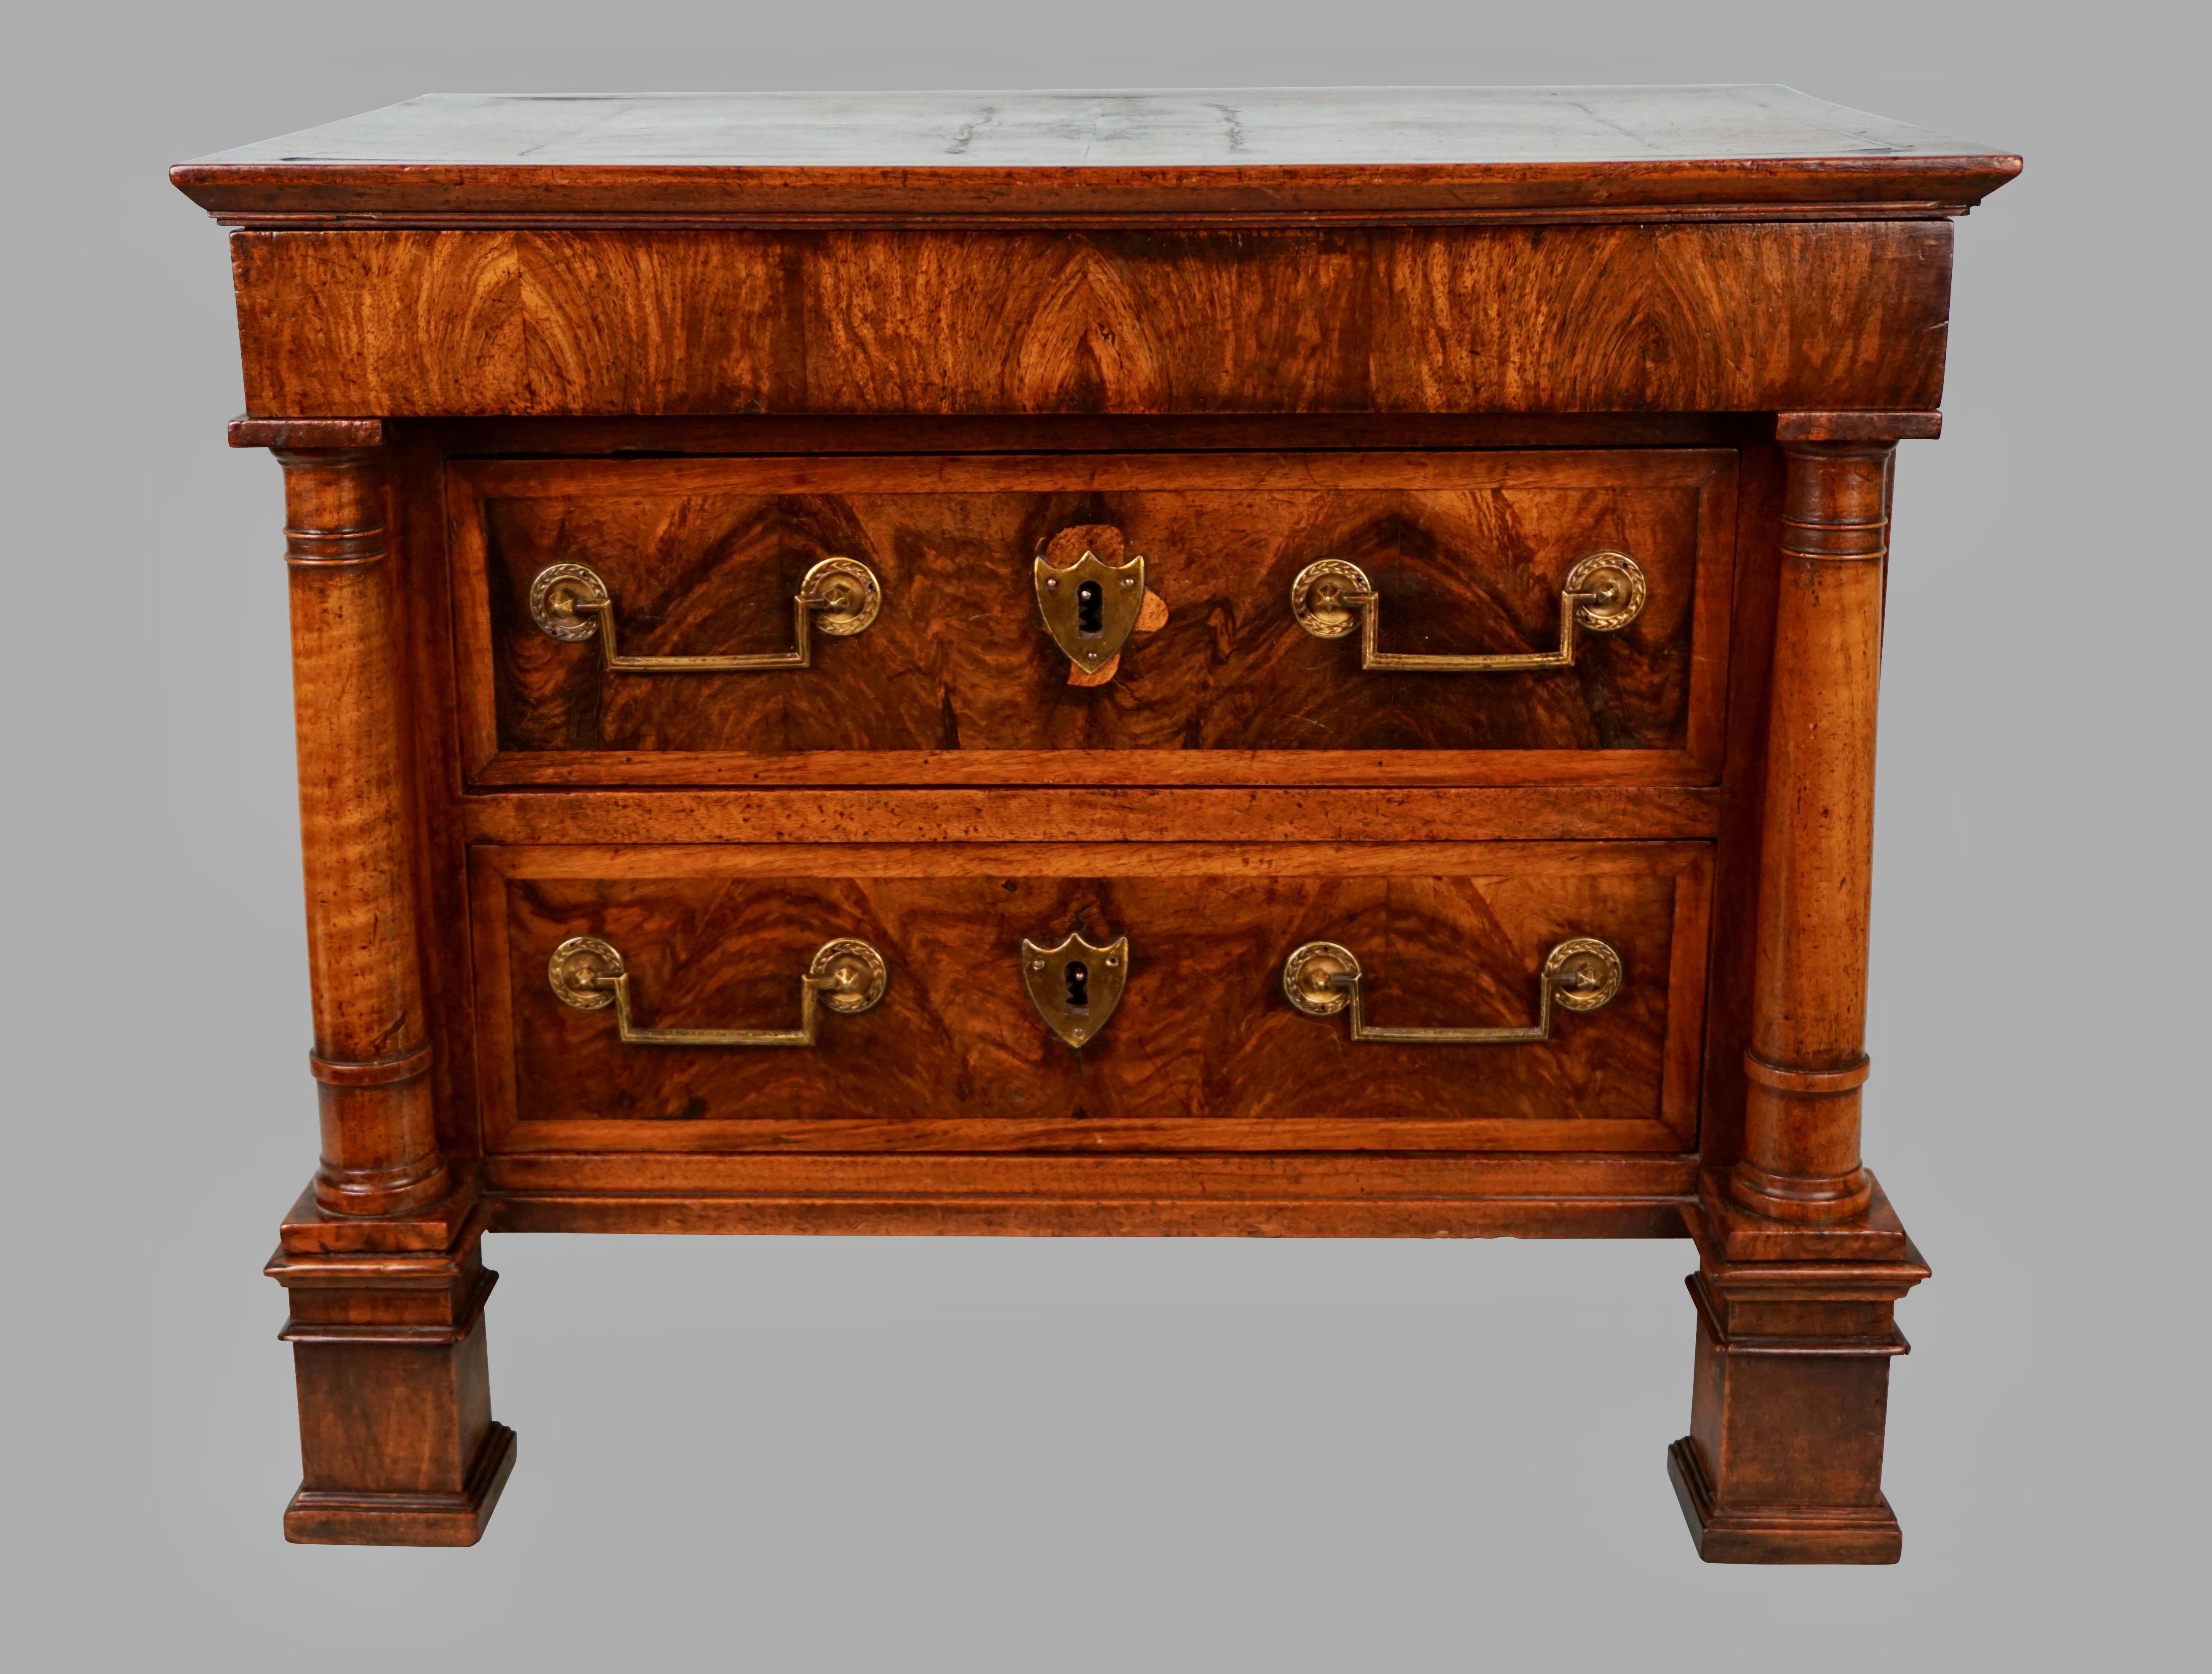 A fine quality French Empire period walnut 3 drawer commode, with one small and 2 large drawers, possessing wonderful old color and patina. This piece, possibly a cabinet makers sample, has 3 oak line drawers including a top drawer with secret